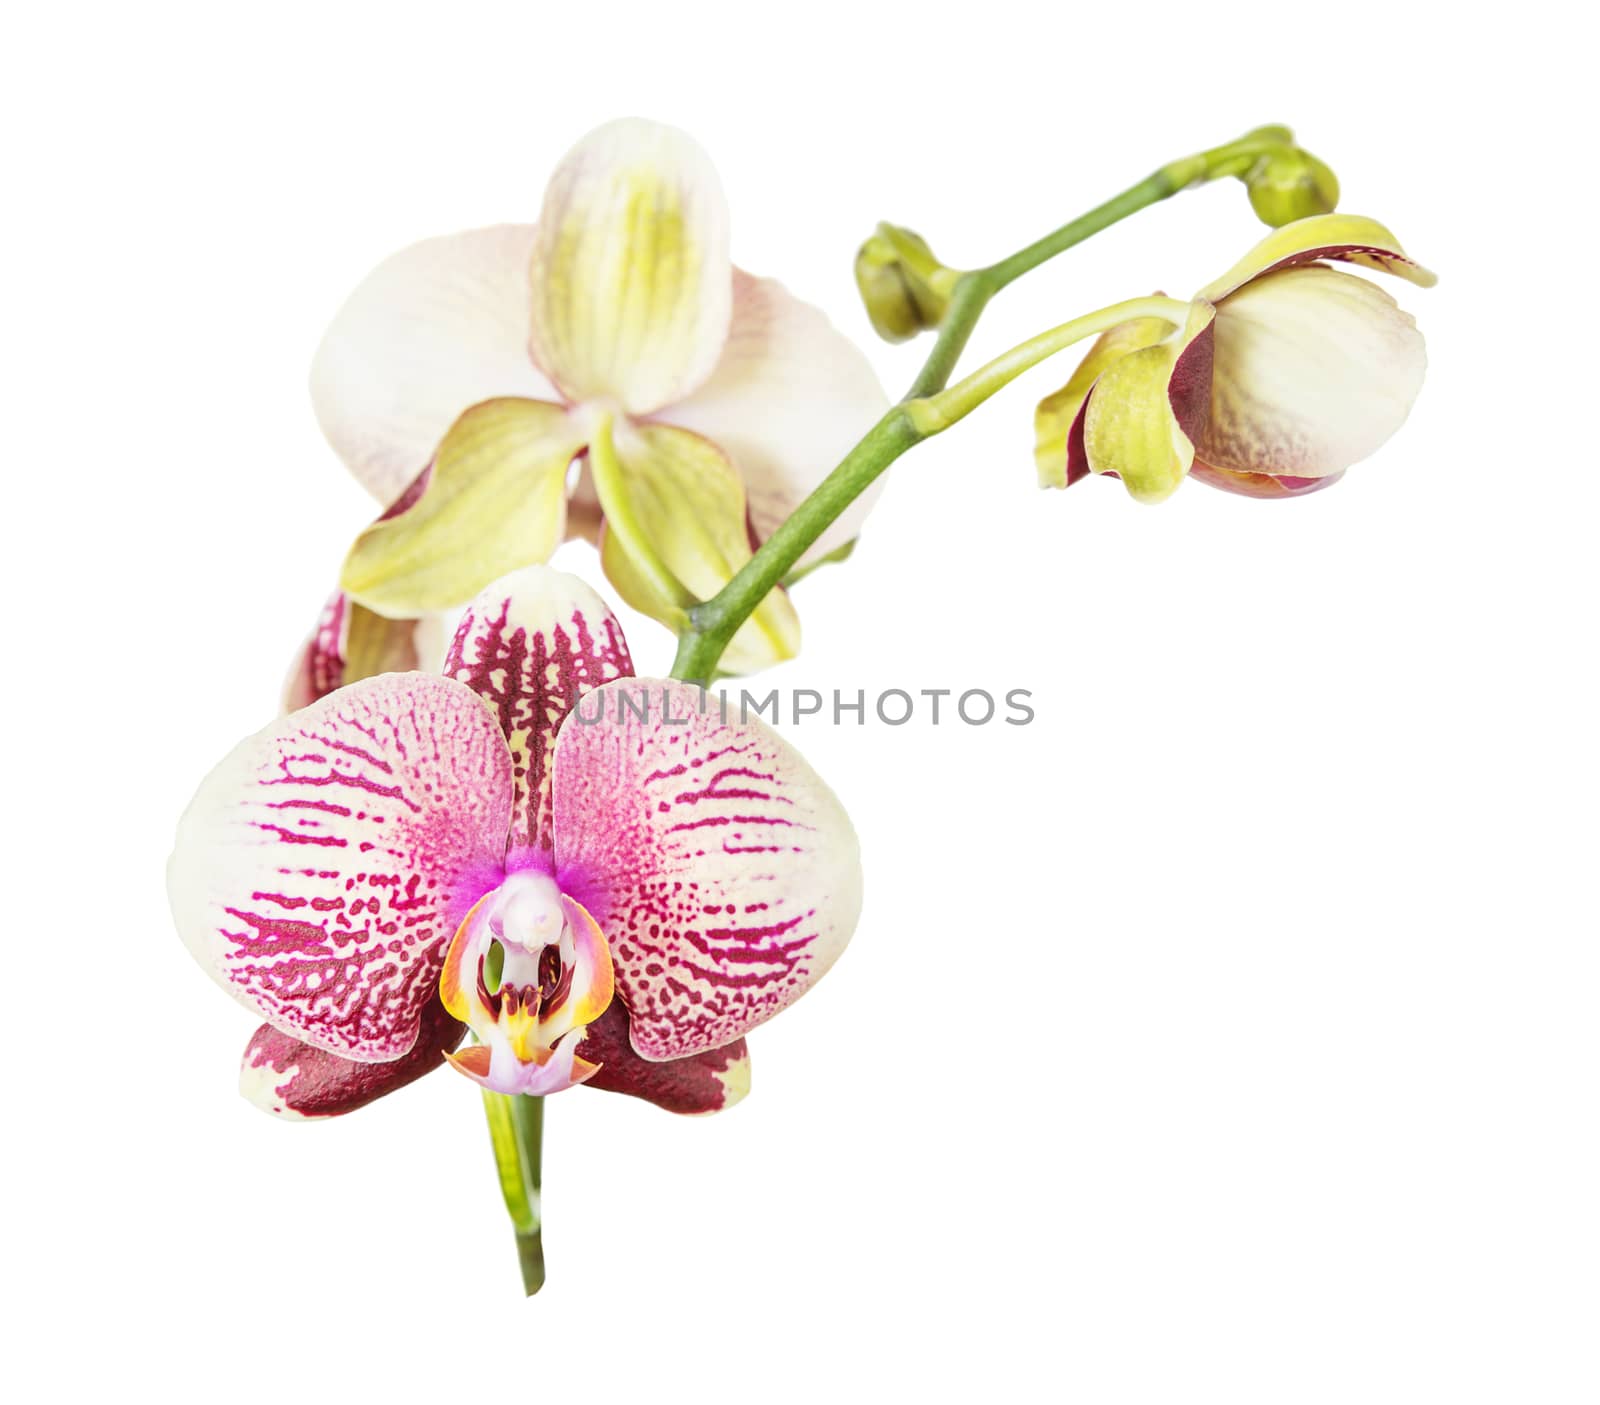 Beautiful Phalaenopsis orchid branch with striped white and pink flowers isolated on white background